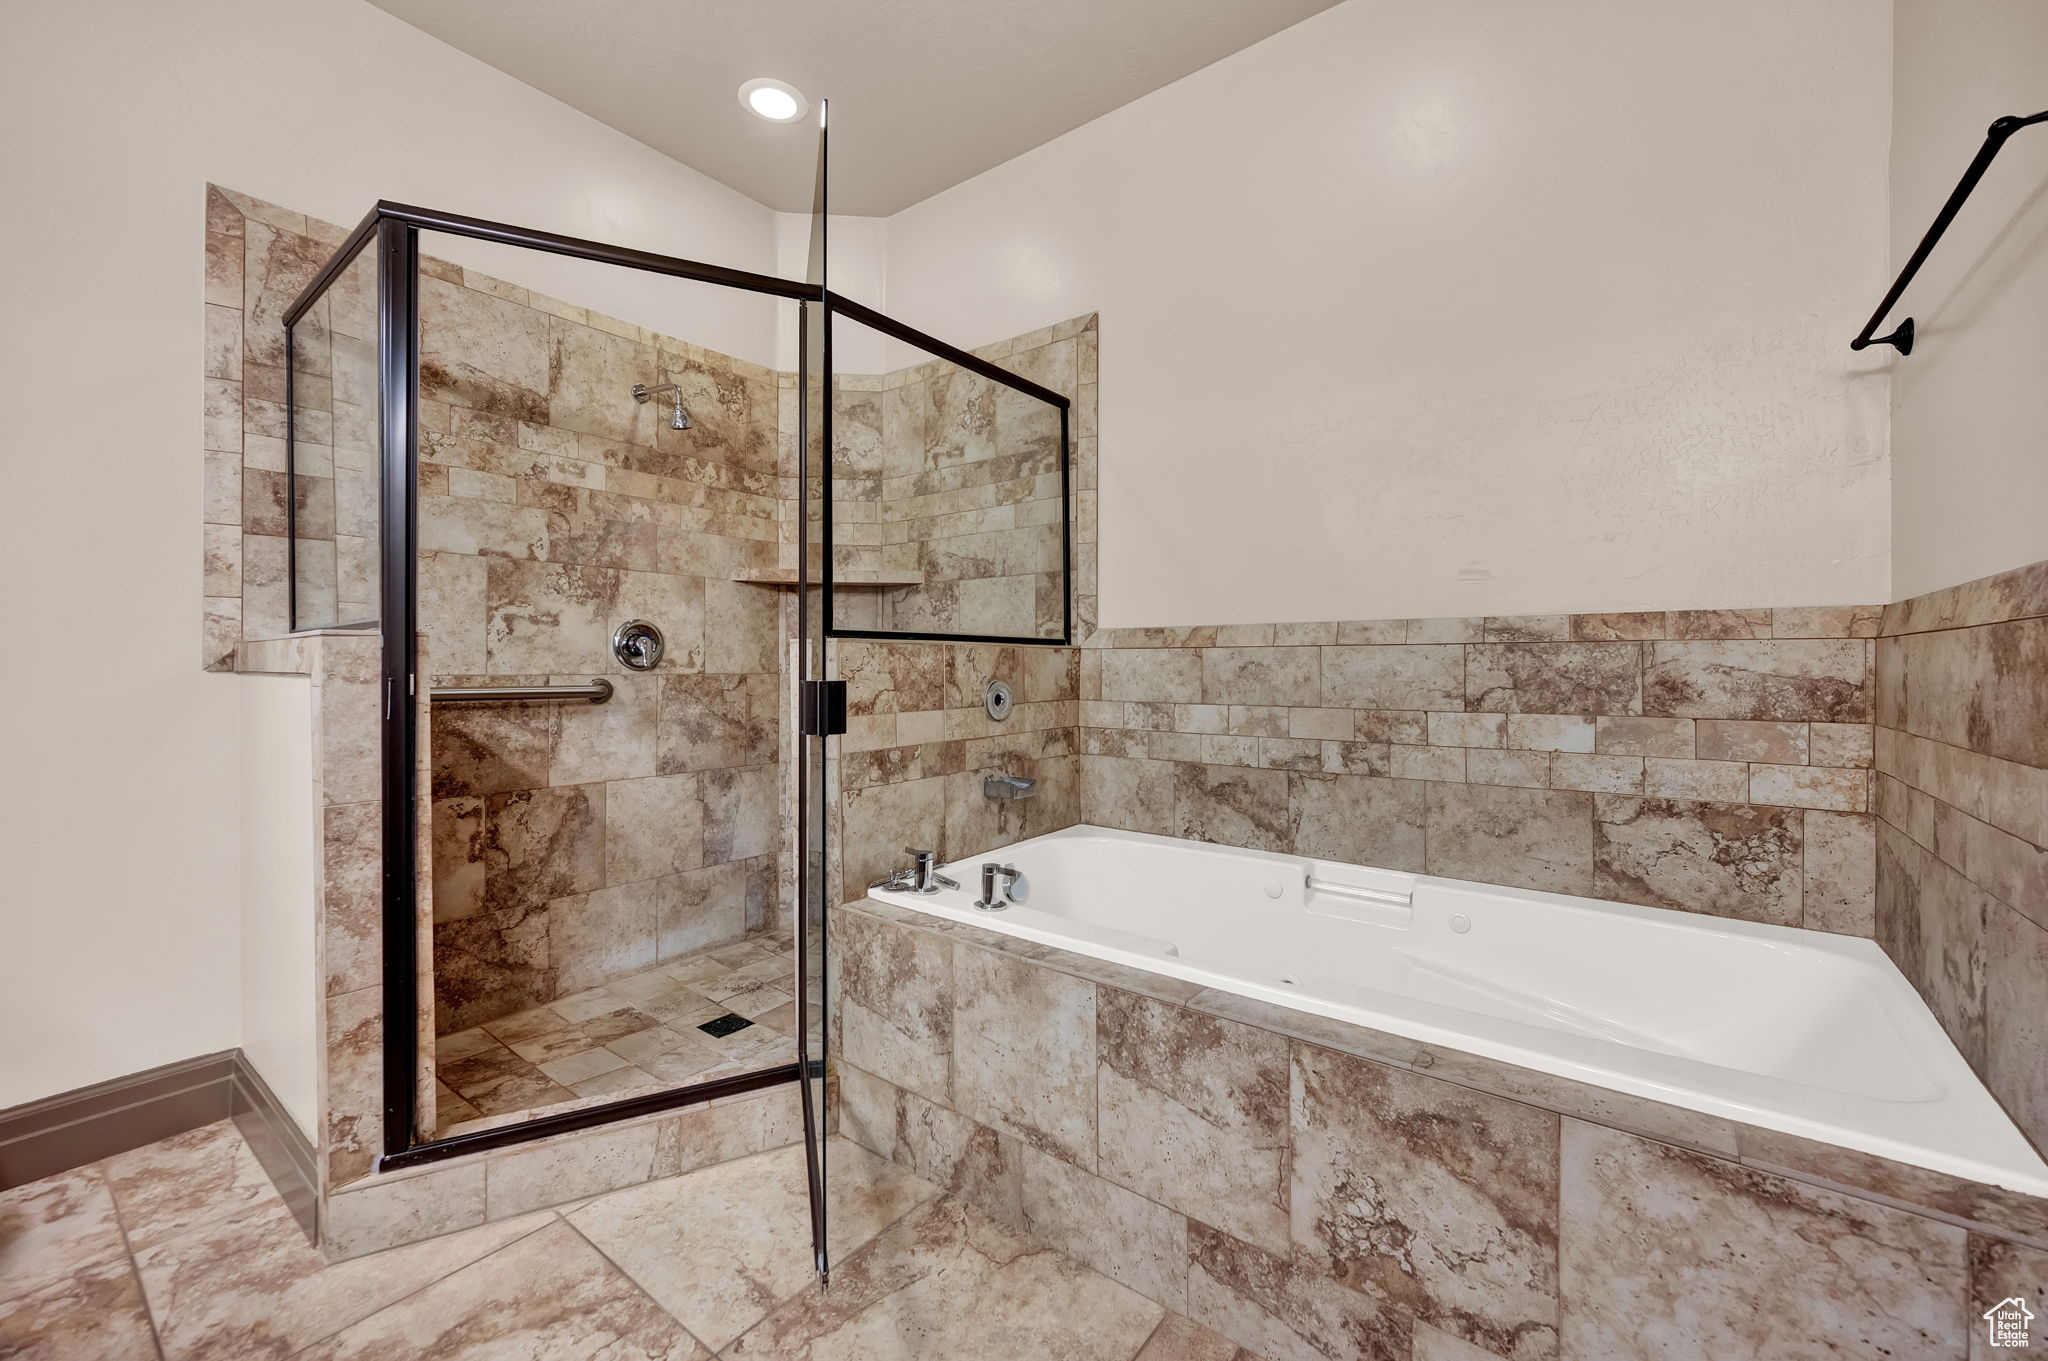 Separate shower and jetted tub